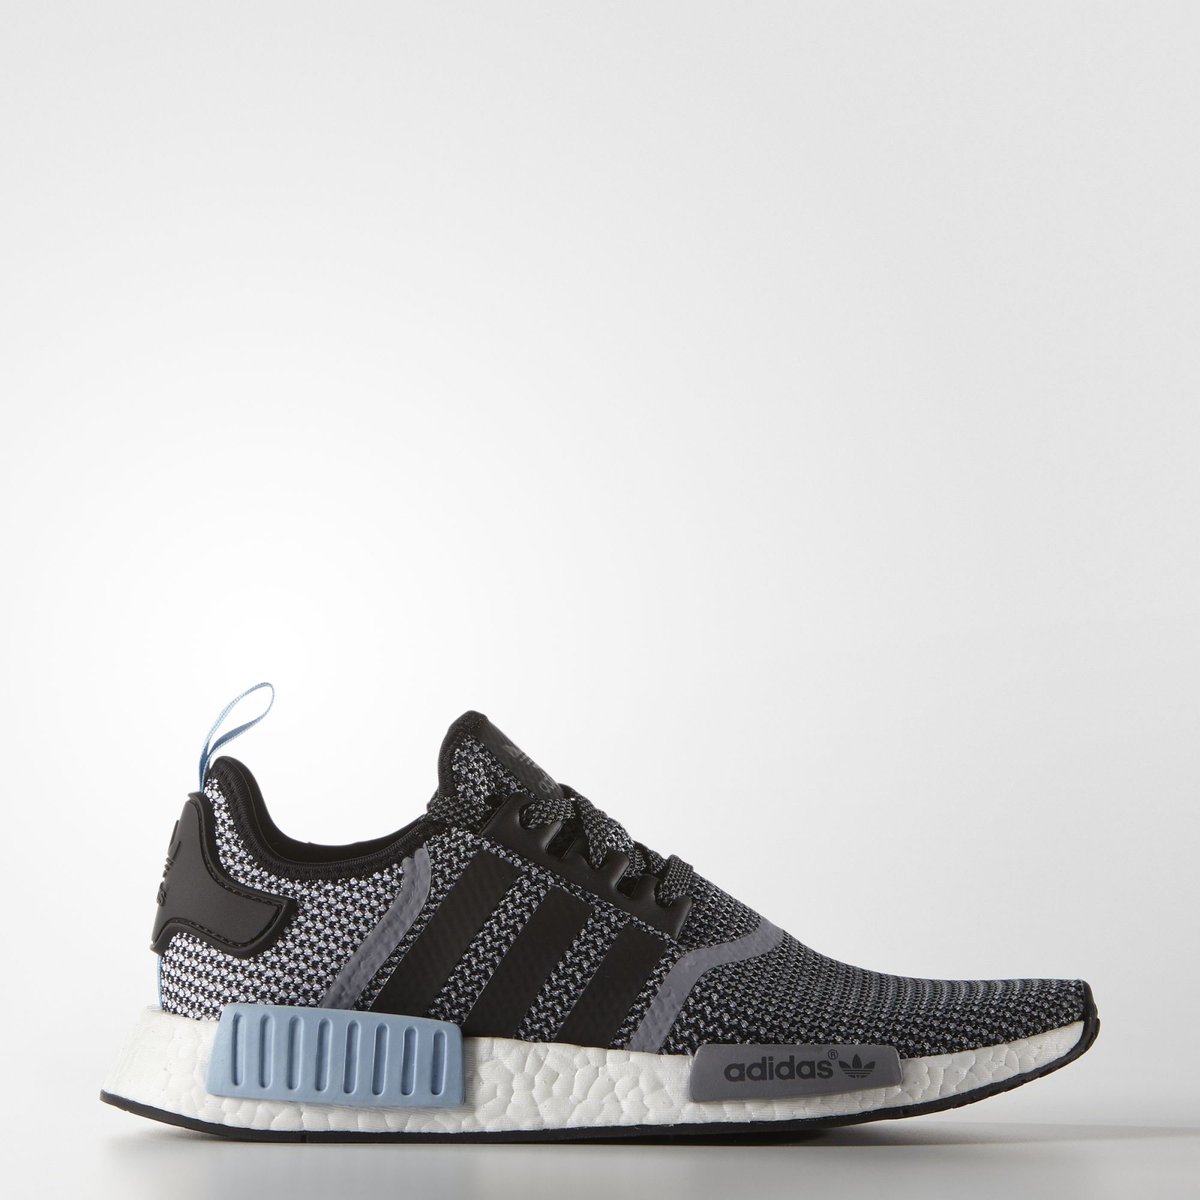 adidas nmd size down